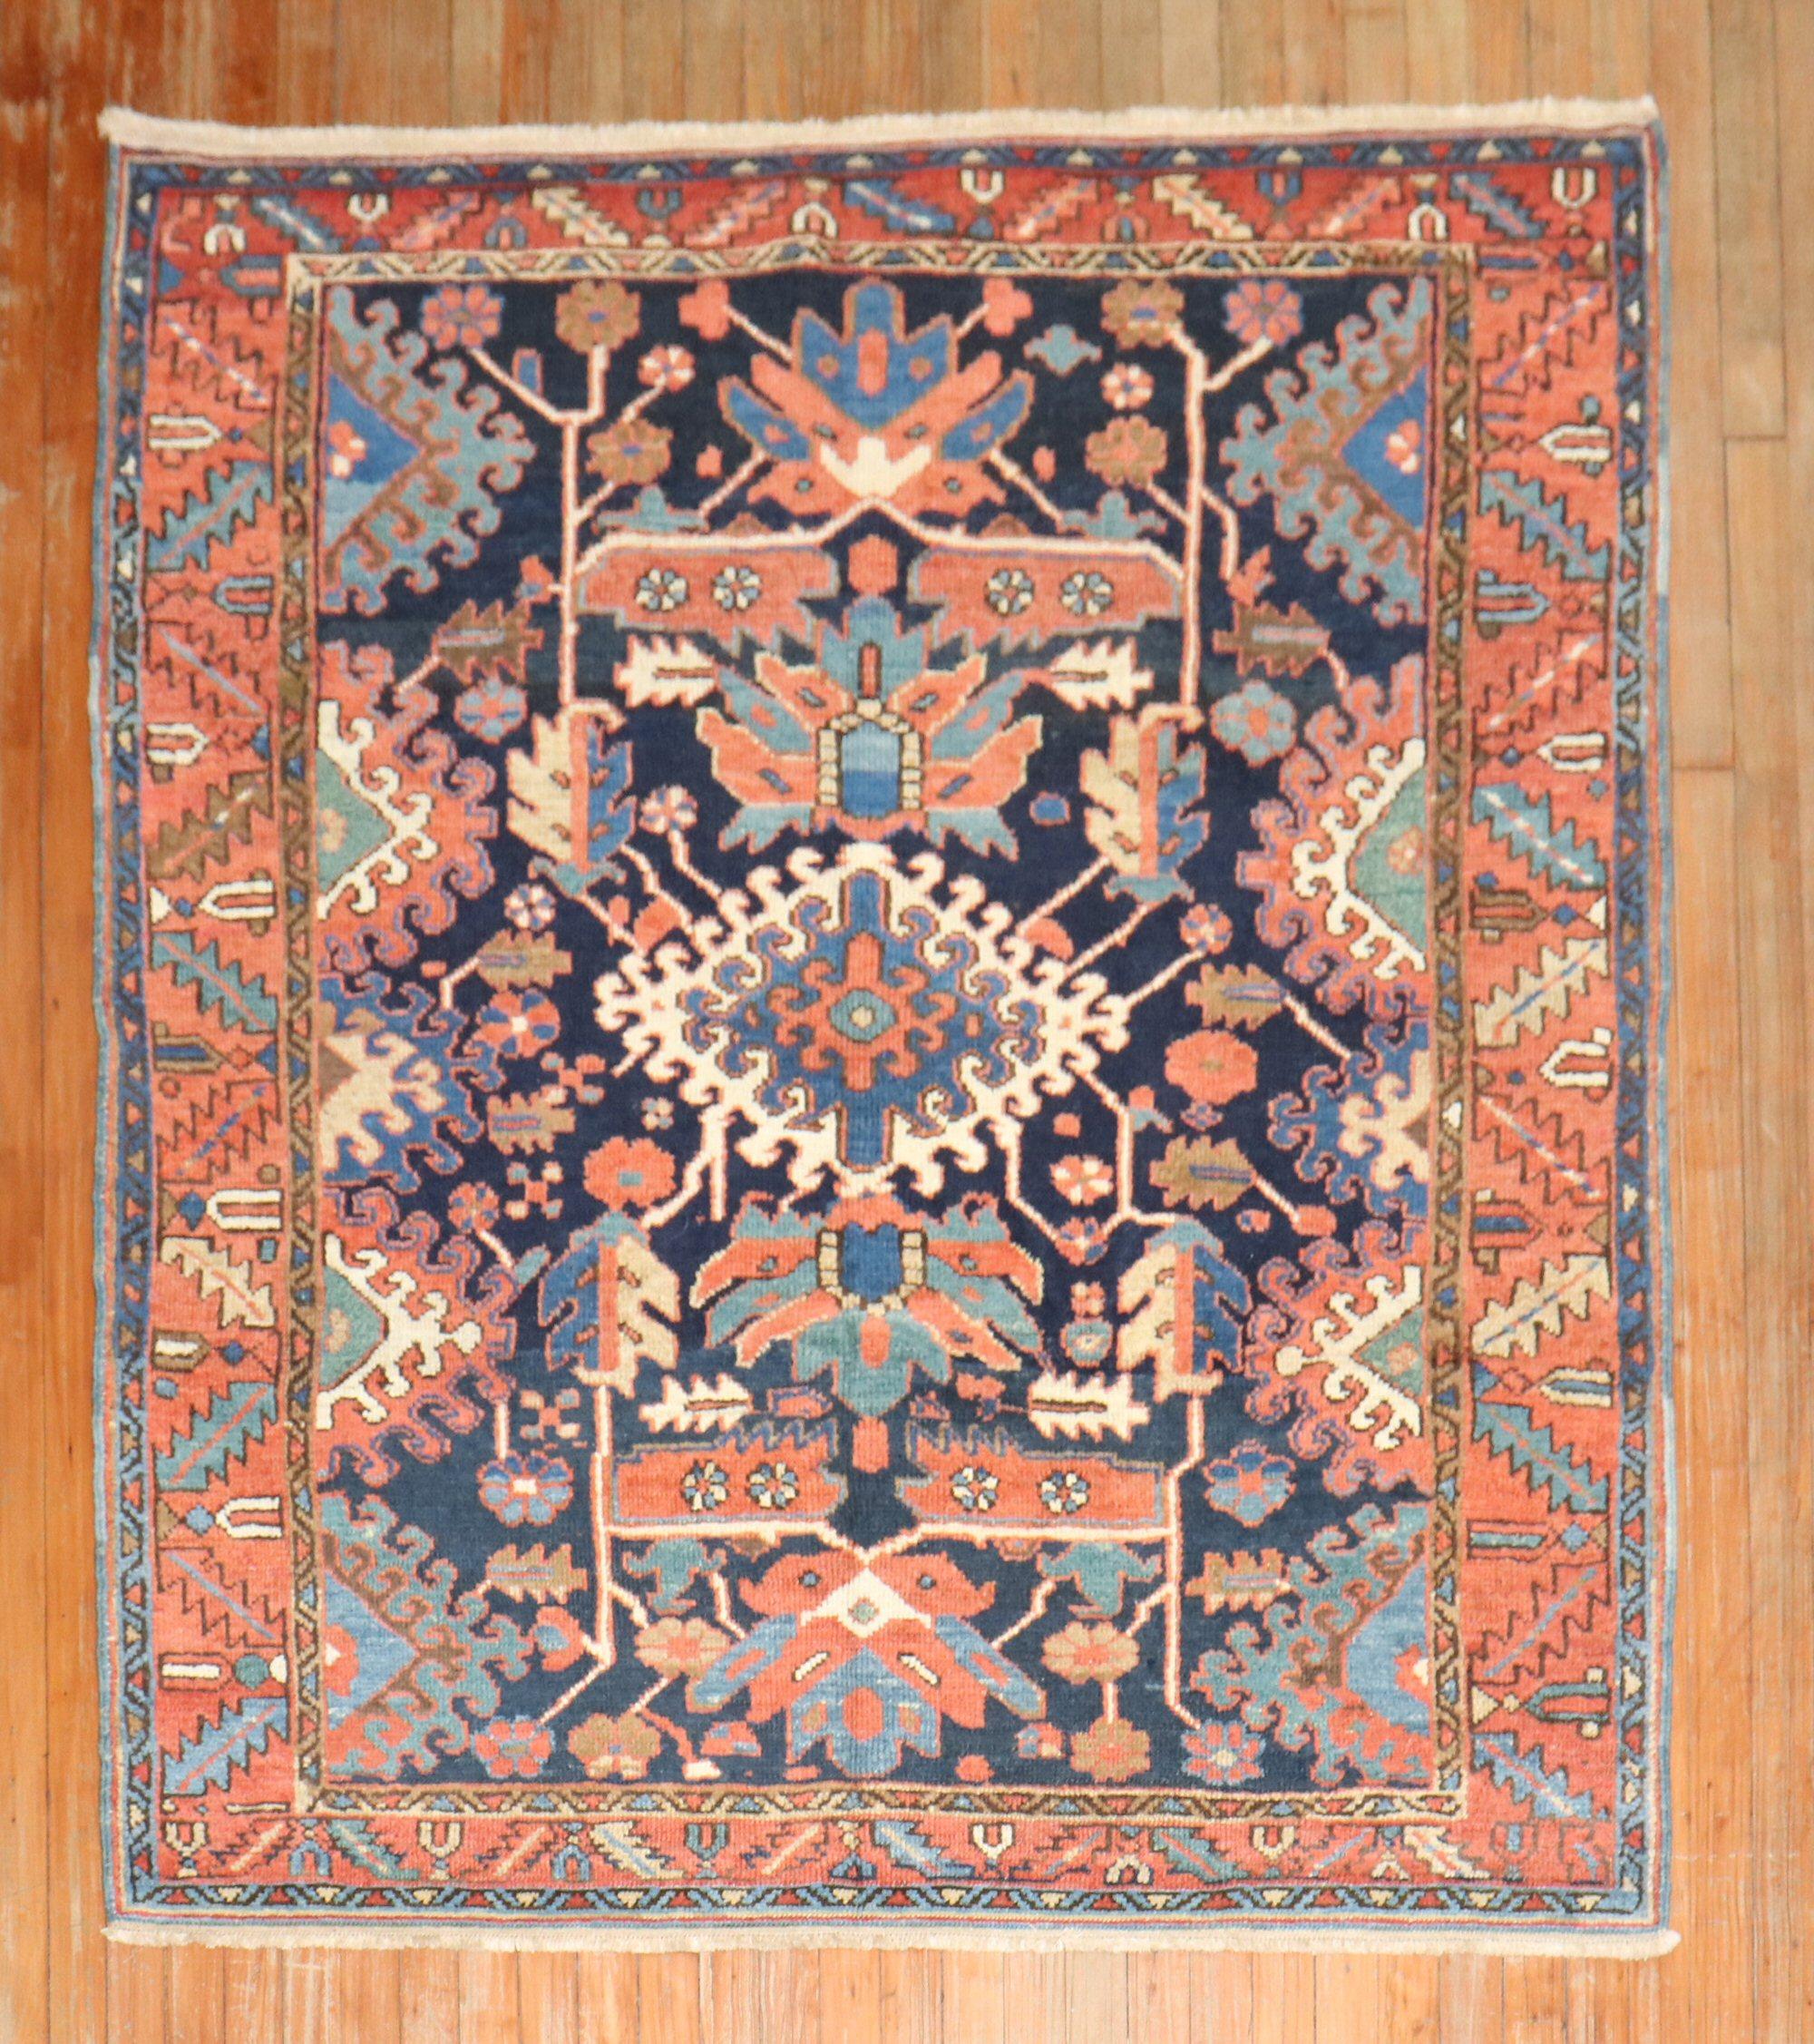 An early 20th century traditional navy blue field Persian Heriz carpet with a geometric all over design.

Measures: 5'x 5'8